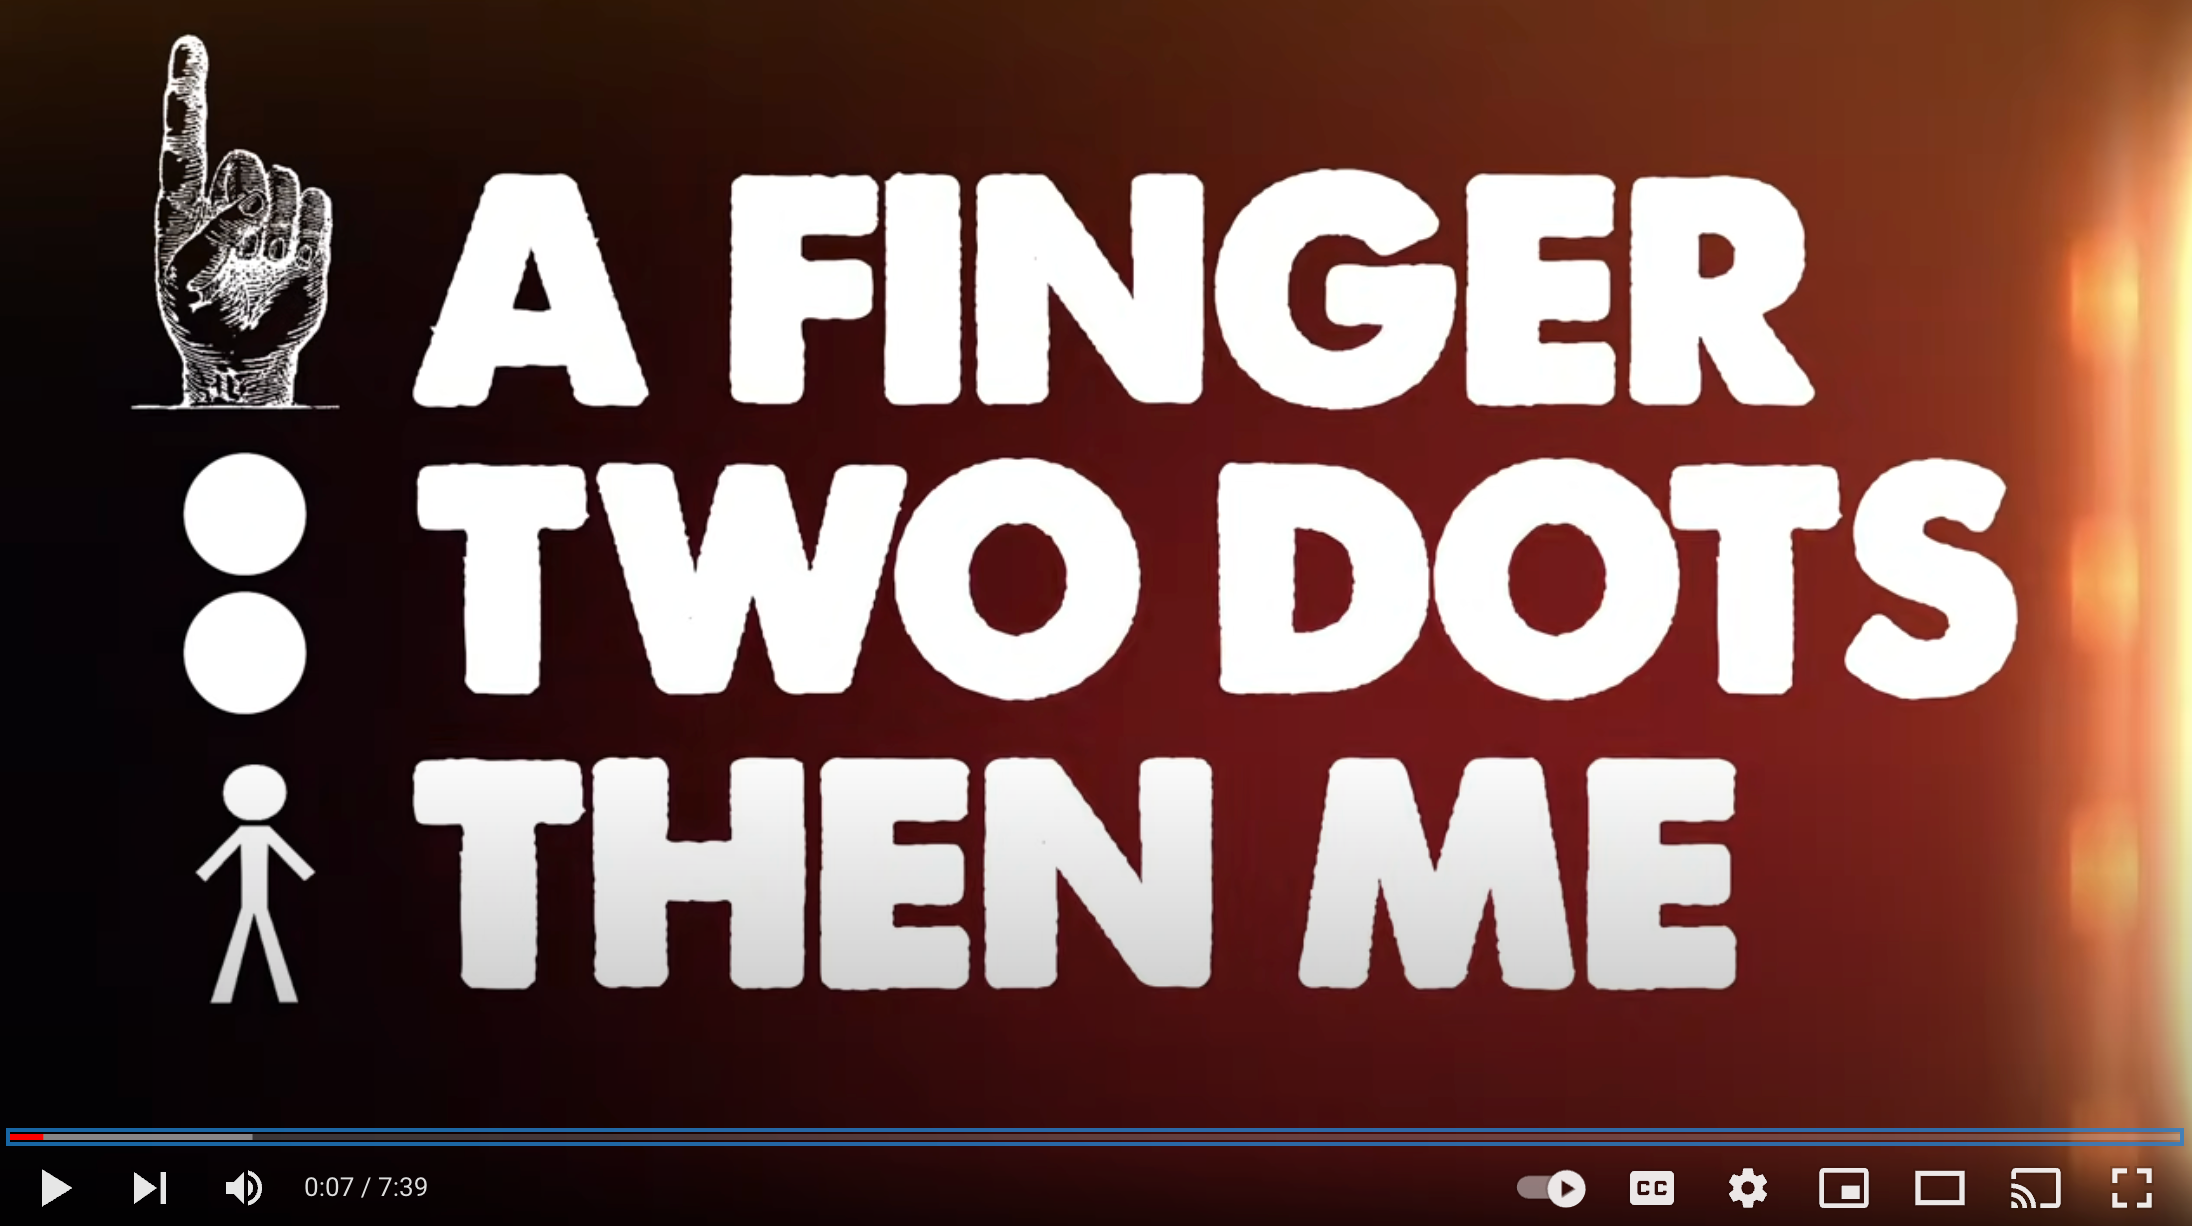 Load video: A Finger, Two Dots Then Me. A poem by Derrick Brown